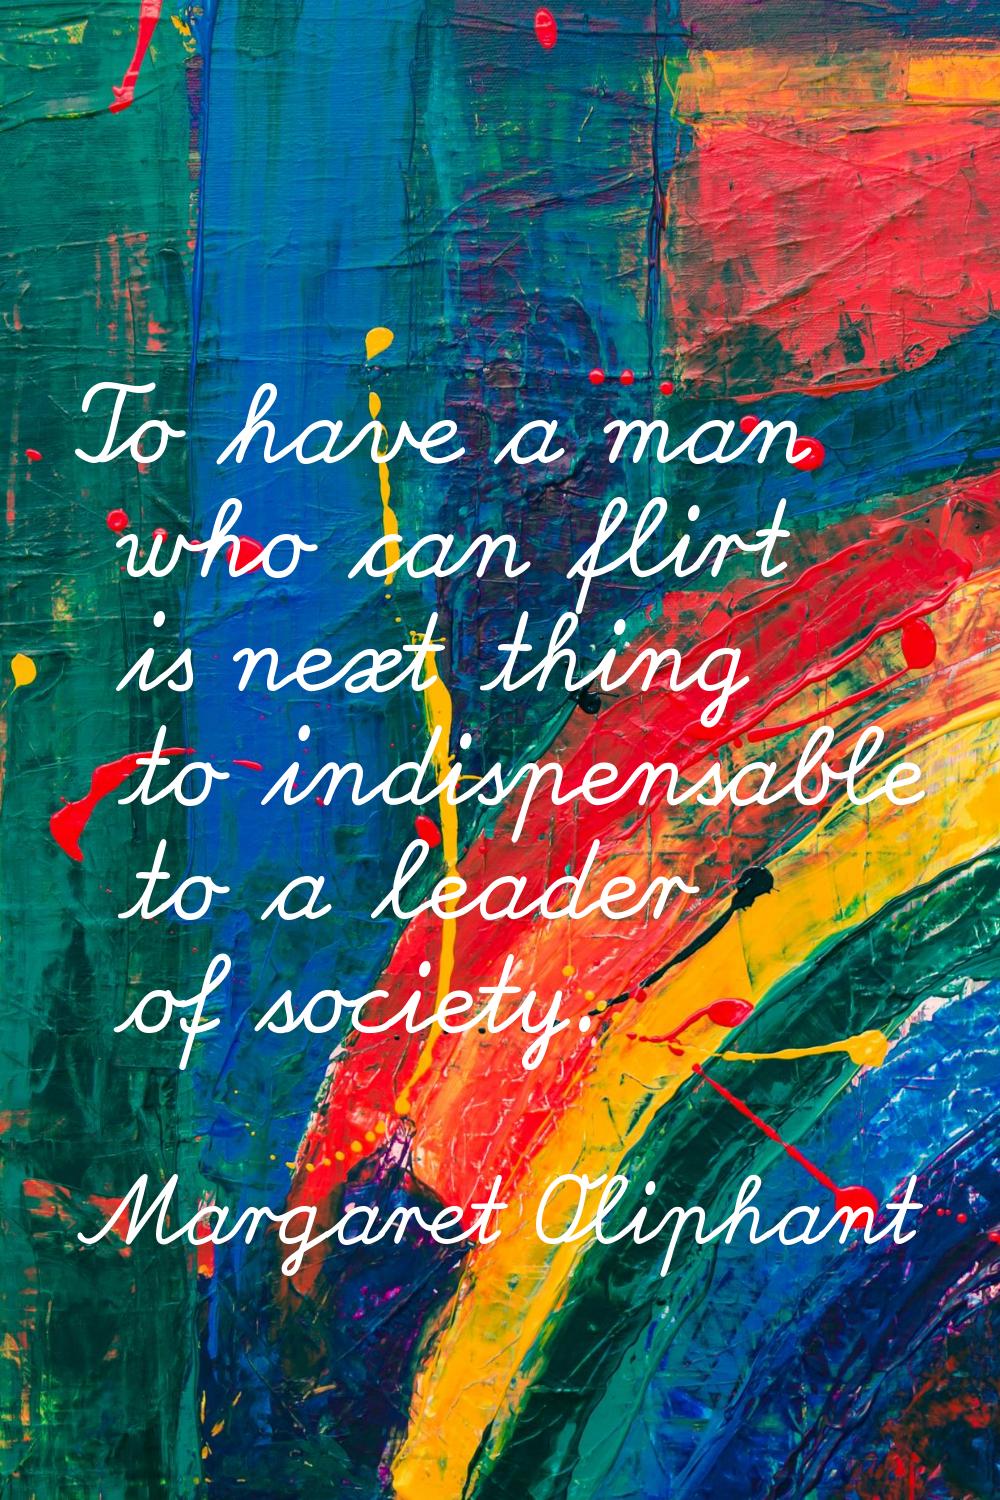 To have a man who can flirt is next thing to indispensable to a leader of society.